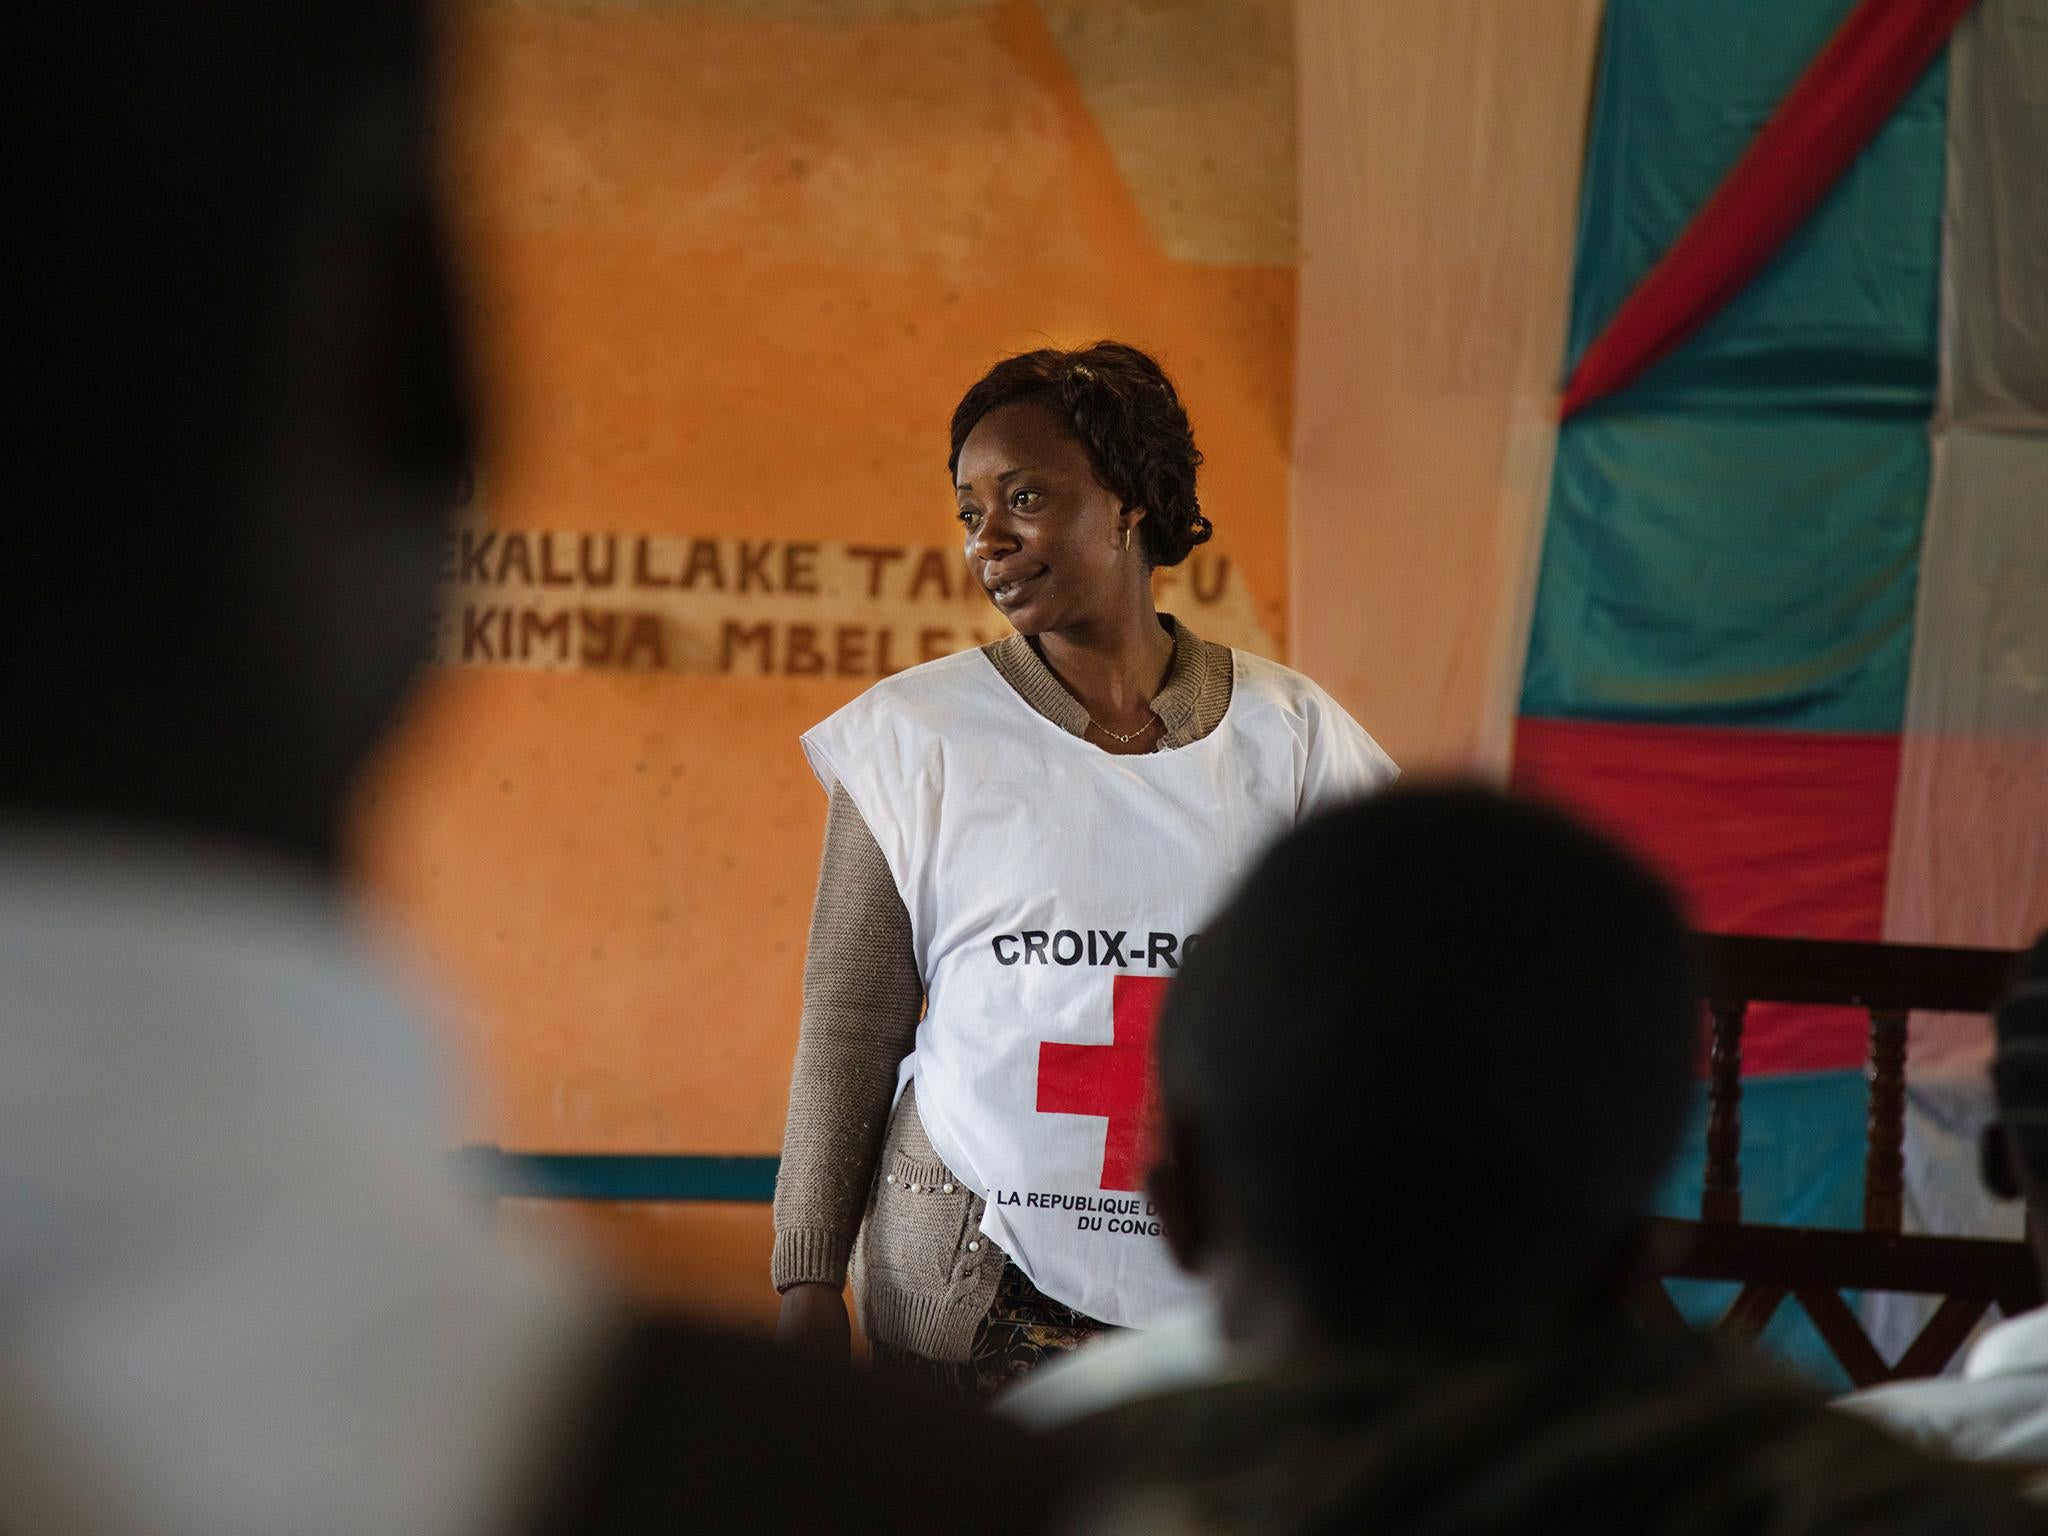 Red Cross volunteers are teaching children about preventing the spread of Ebola